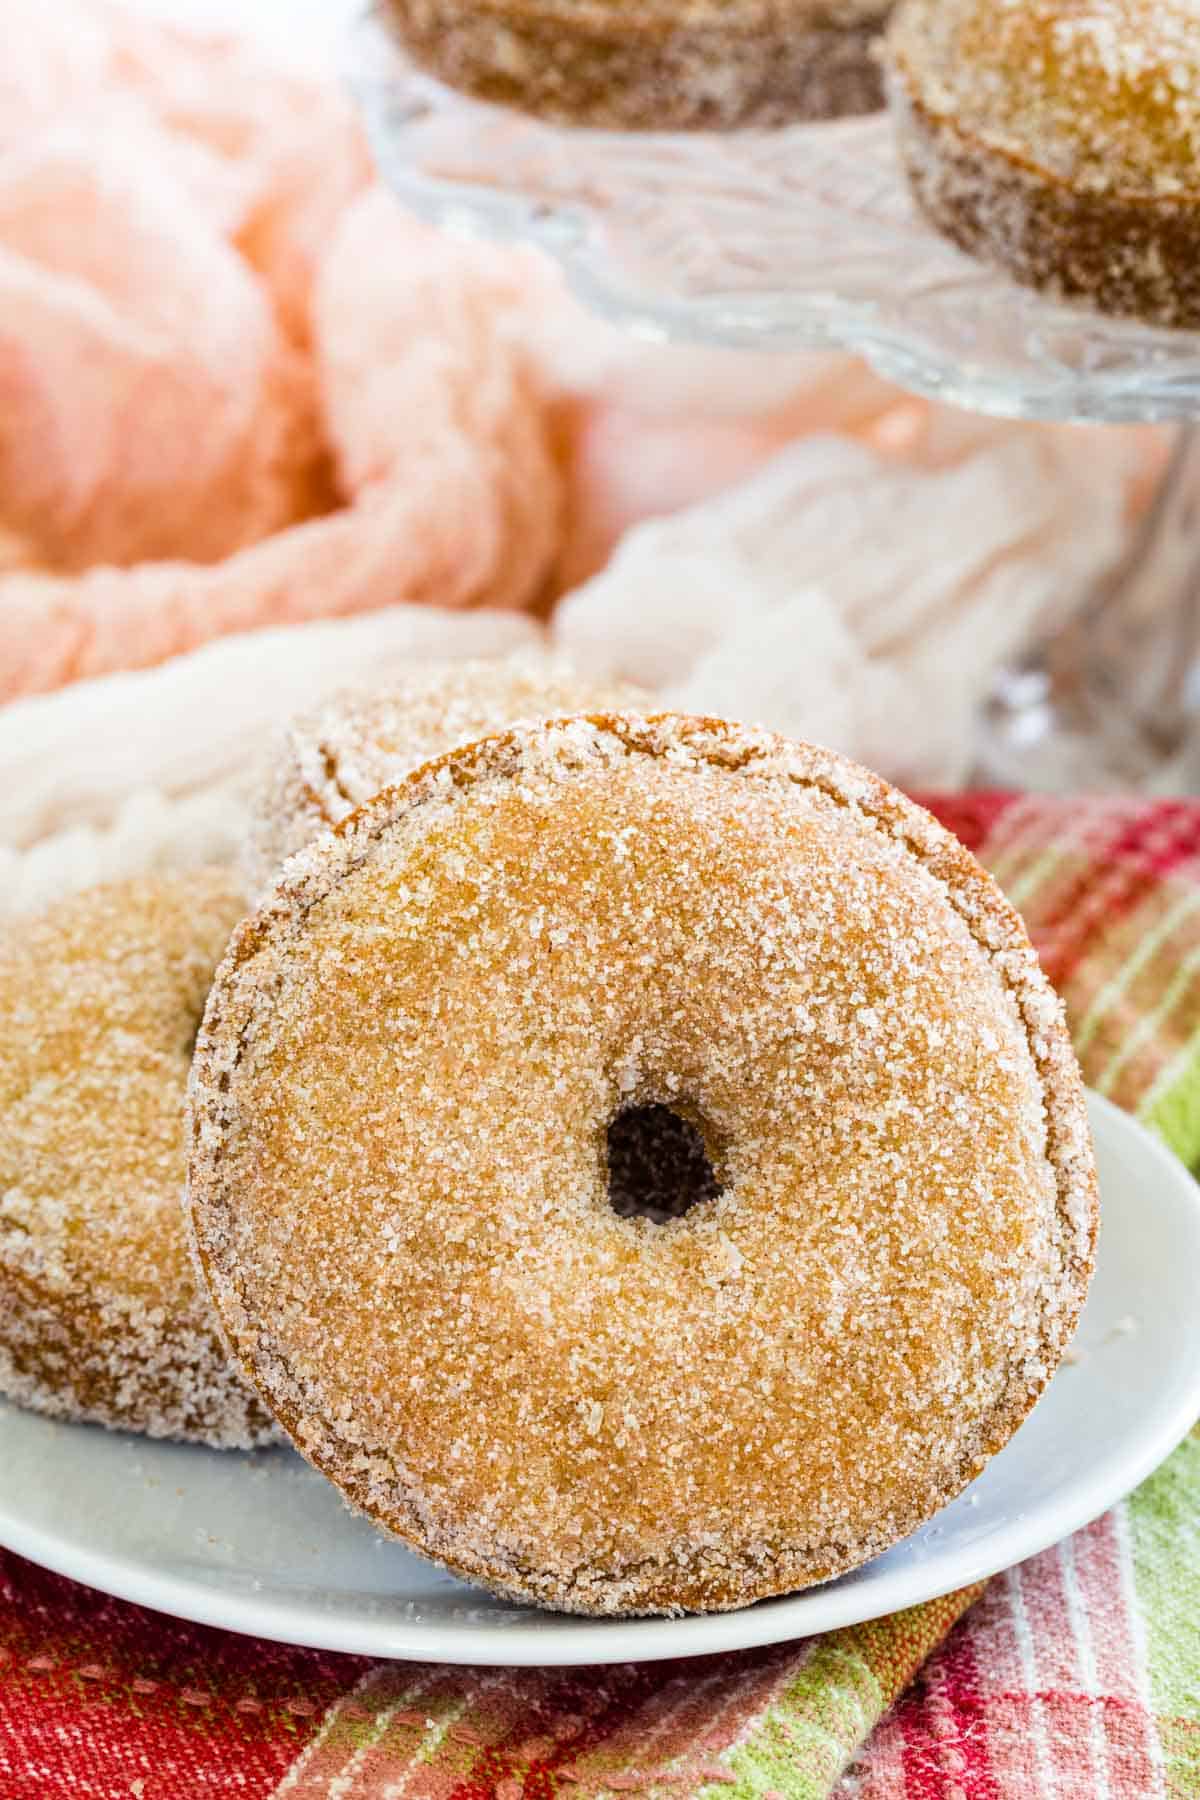 Close up of two gluten free apple cider donuts on a white plate, with more donuts on a glass cake stand in the background.